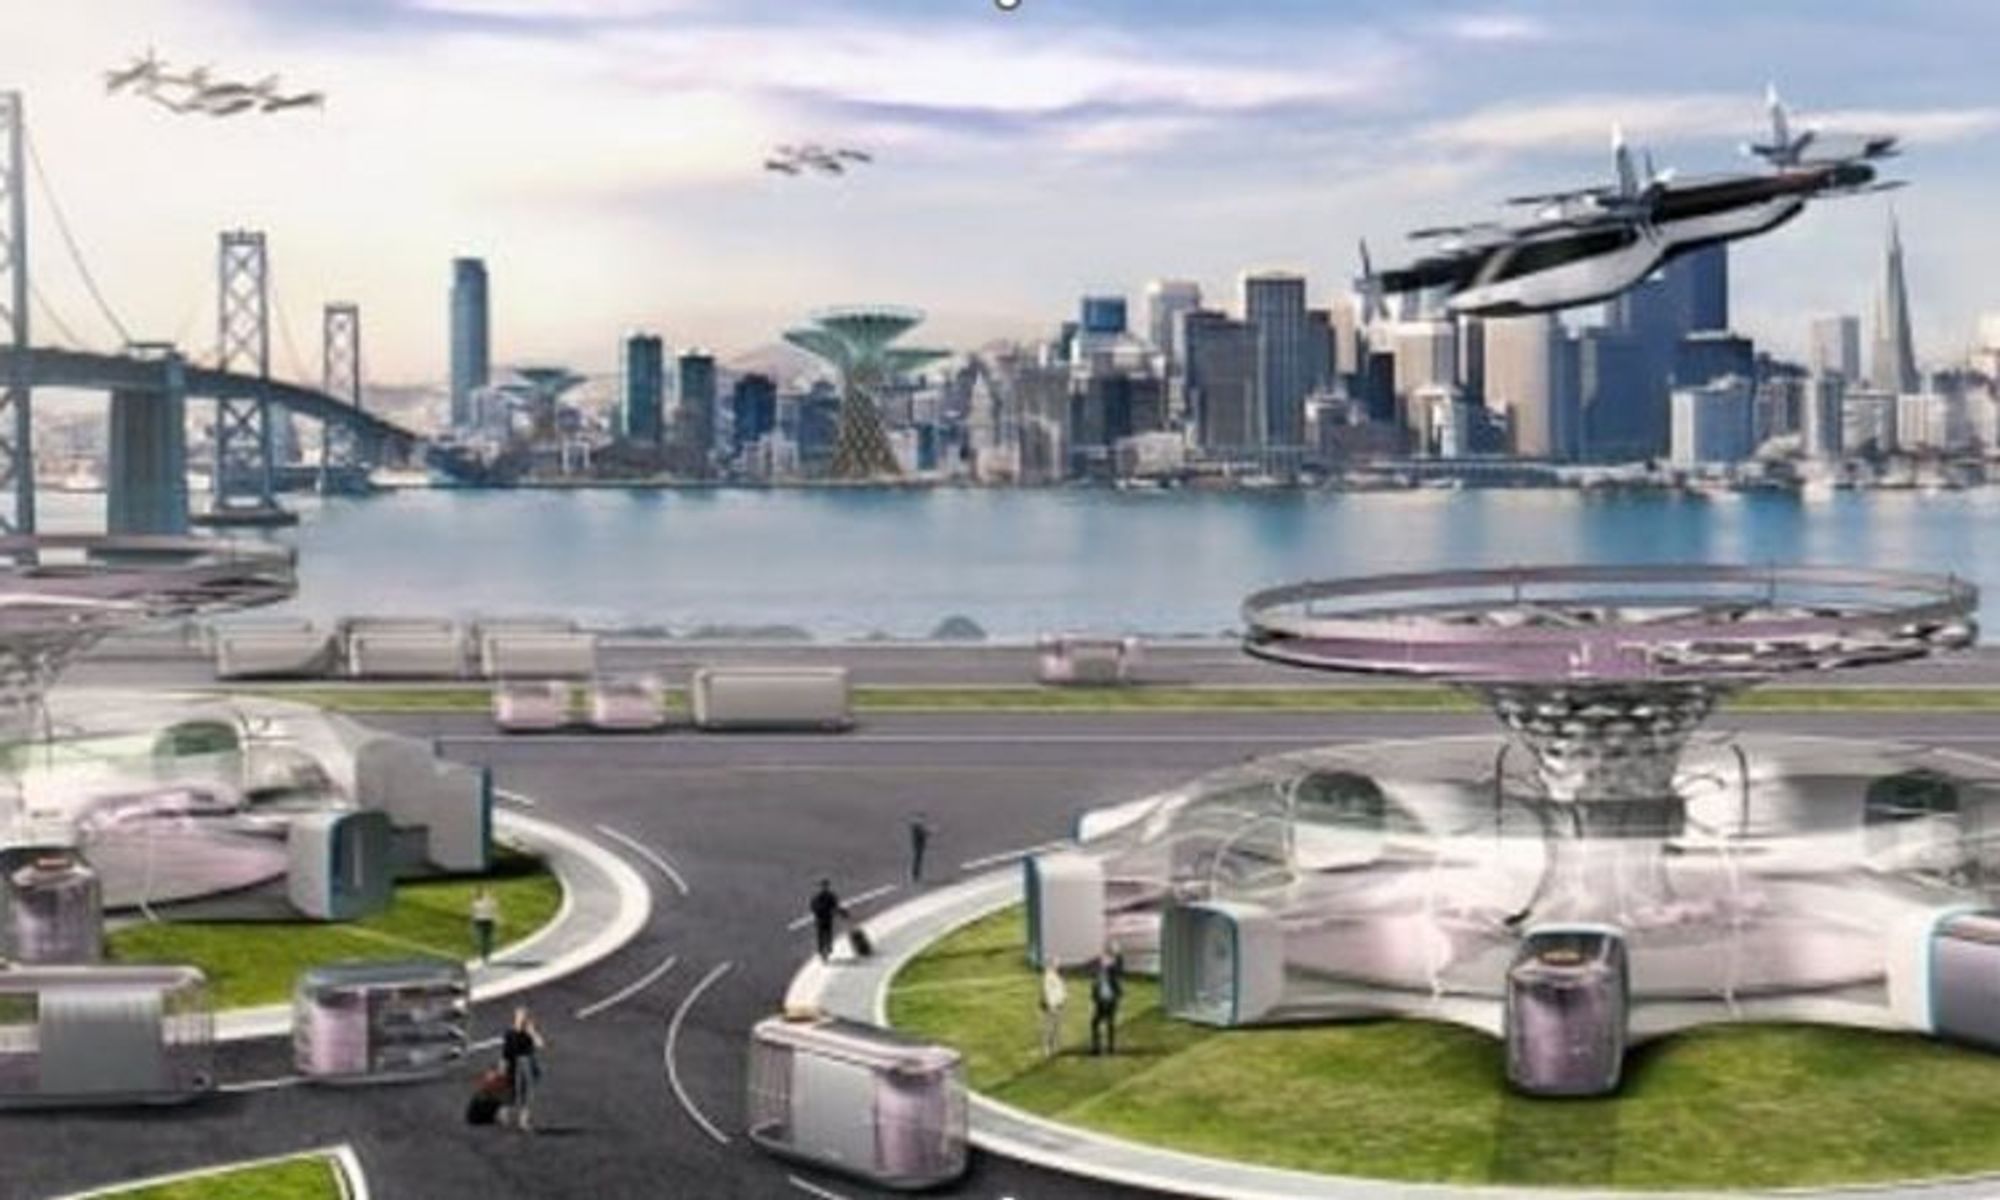 "Three-way race set for Korea's flying car commercialization in 2025" - Korea Herald - Urban Air Mobility News